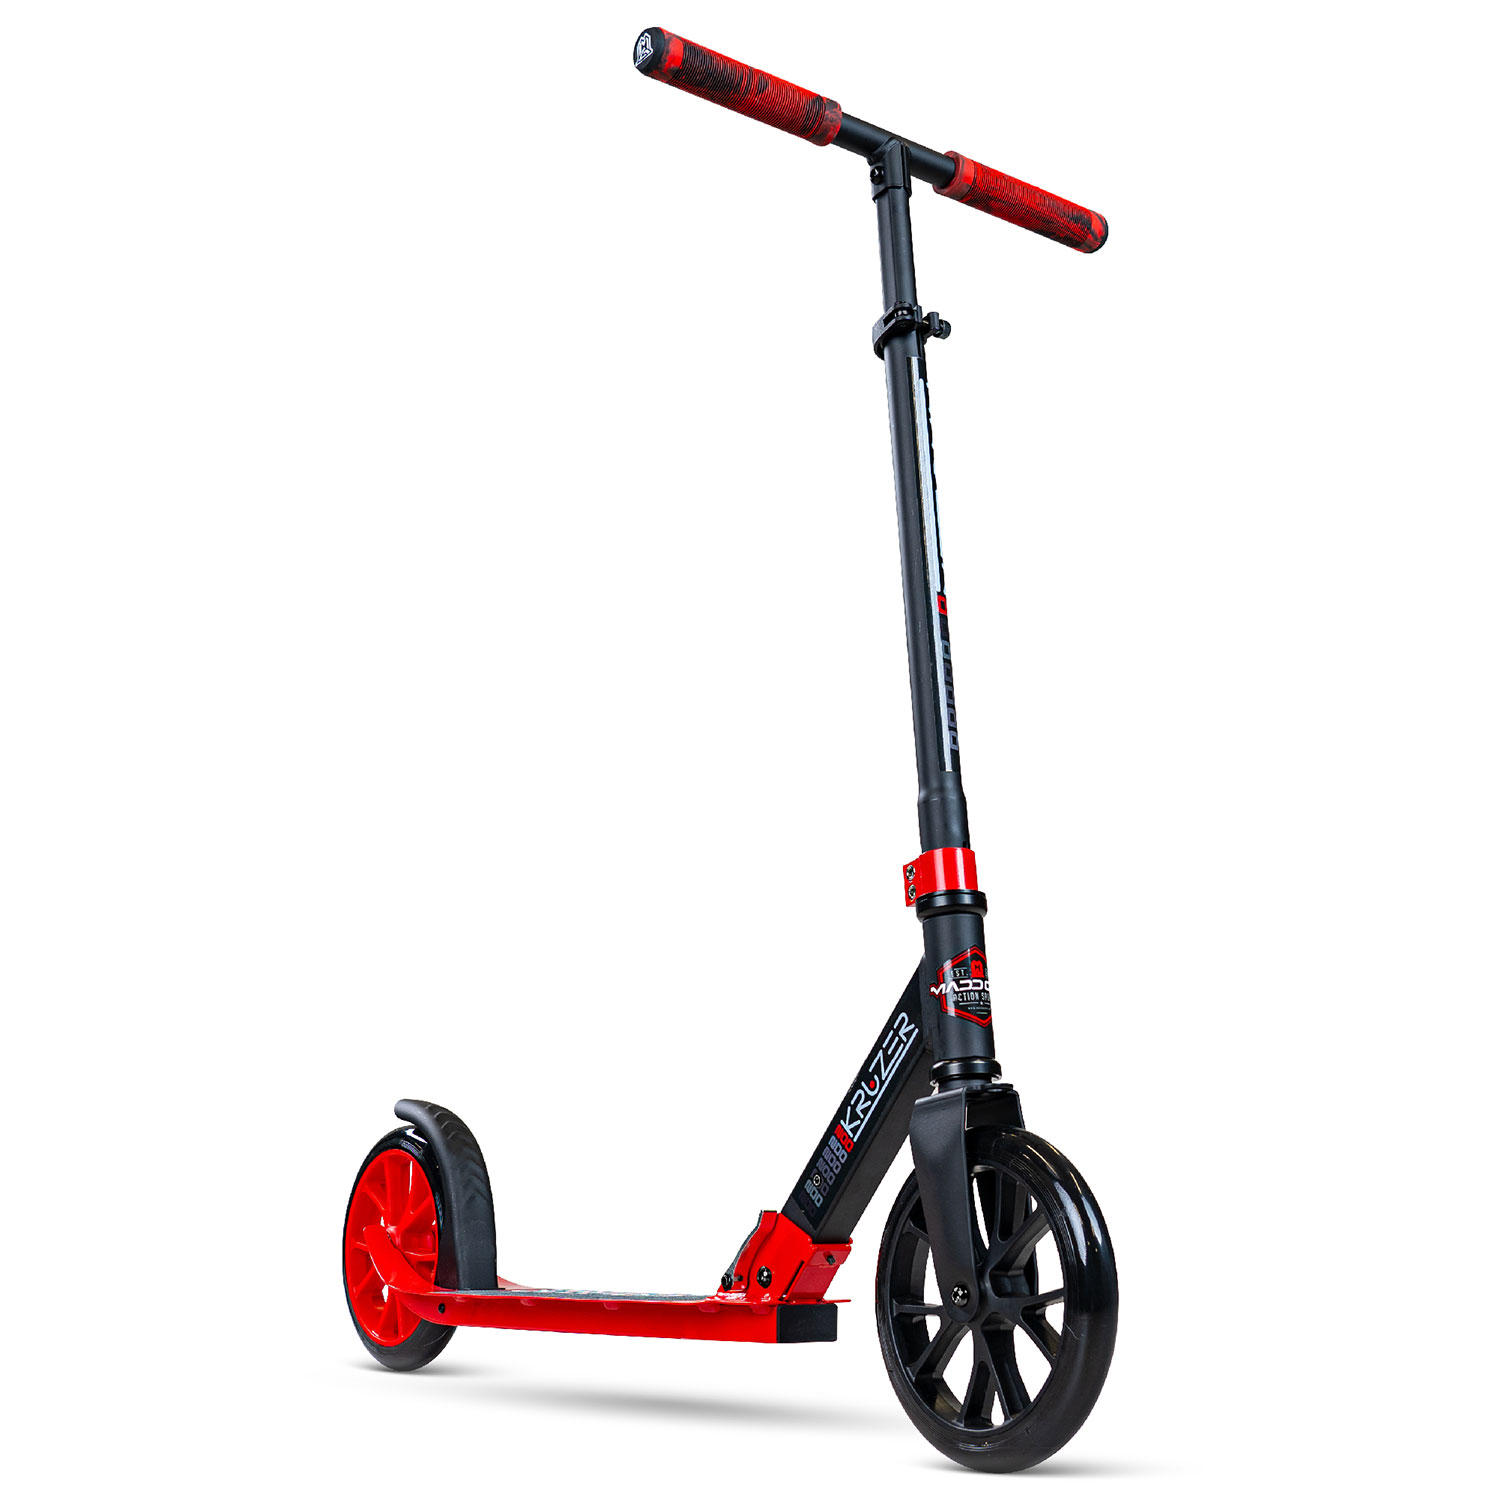 Madd Gear Kruzer 200mm - Suits Ages 5+ - Max Rider Weight 220lbs - Folding And Height Adjustable Commuter Scooter - 3